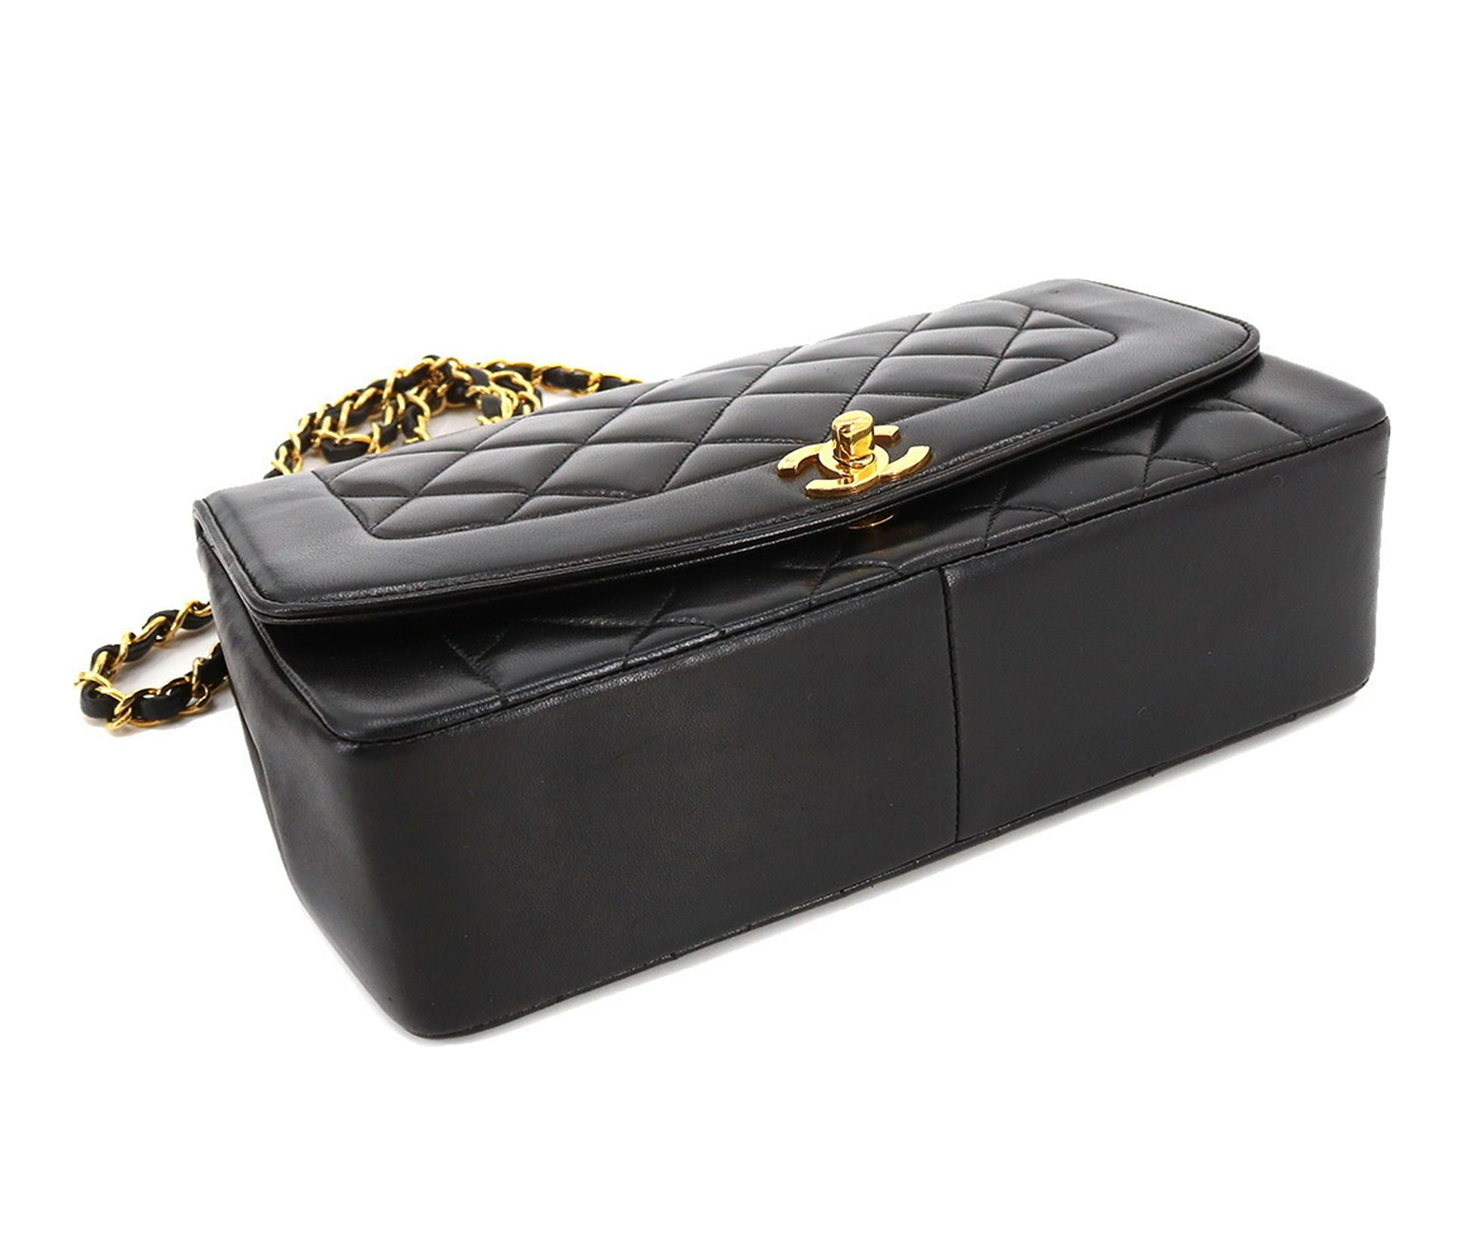 All About the Chanel Classic Flap Bag - The Vault